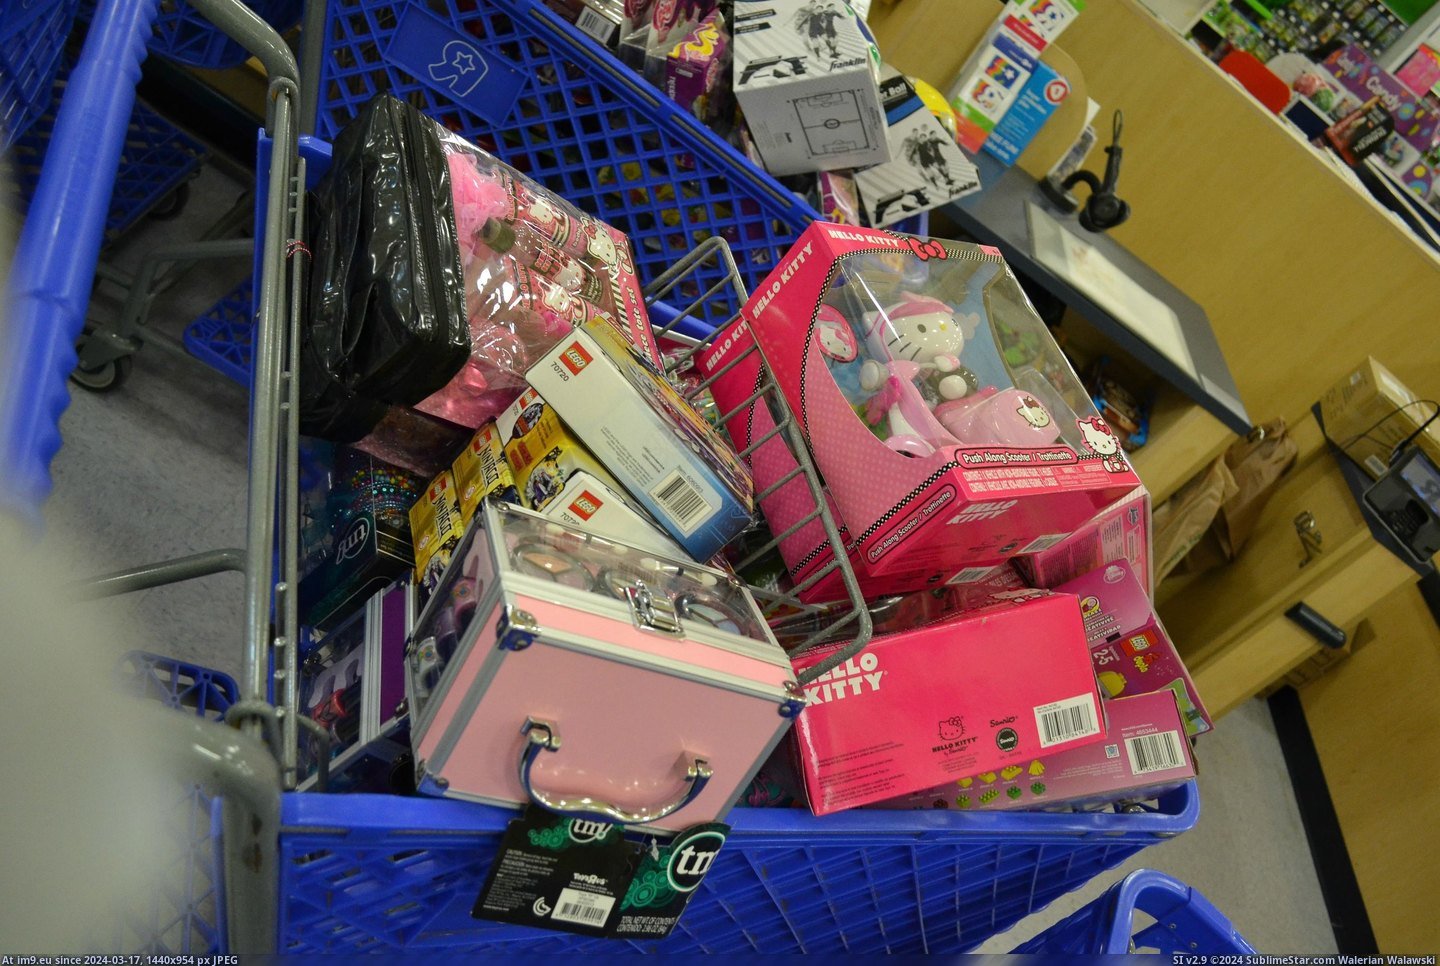 #For #Happy #All #Bunch #Tots #Donated #Christmas #Toys #Kids [Pics] Hopefully this makes a bunch of kids happy this Christmas all donated to Toys for Tots. 3 Pic. (Image of album My r/PICS favs))